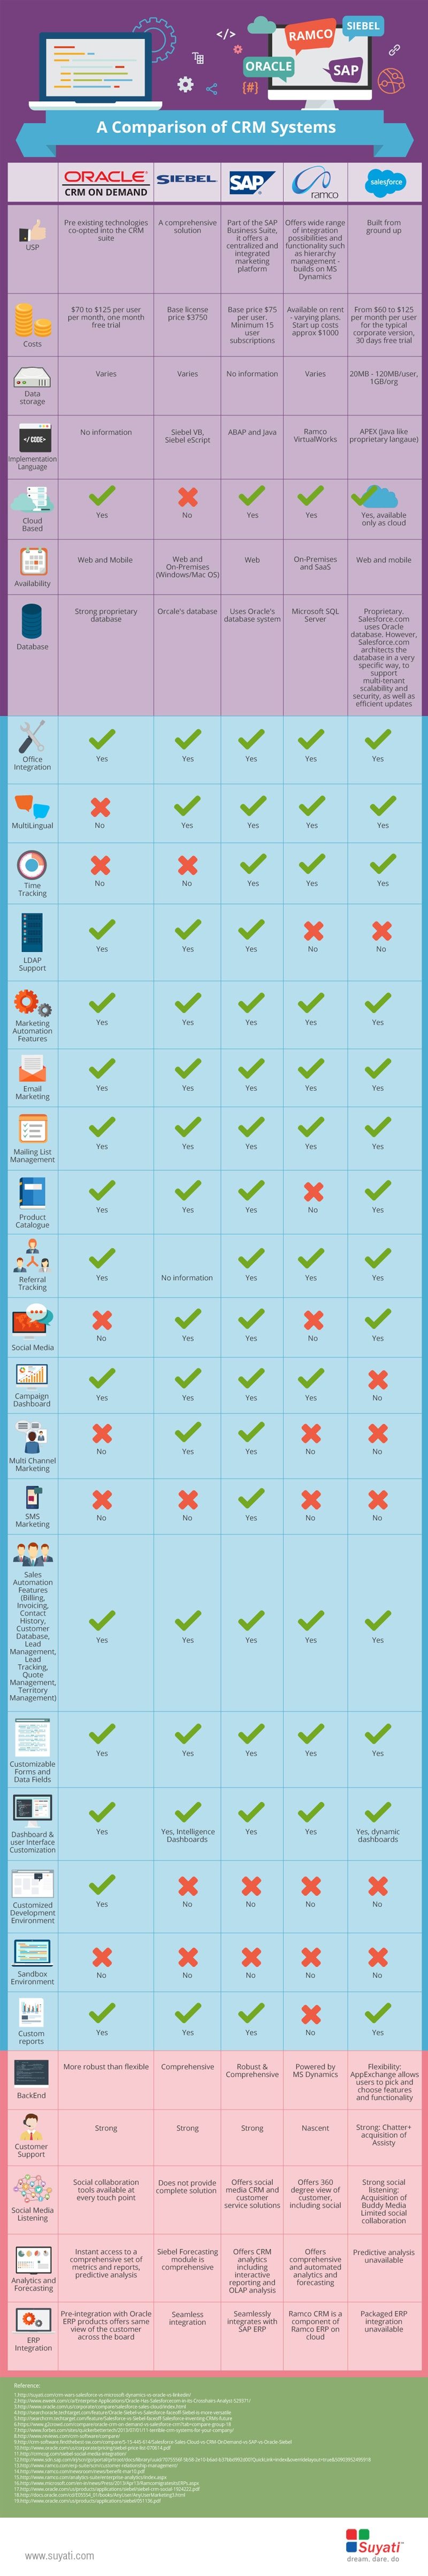 Comparision of Top CRM